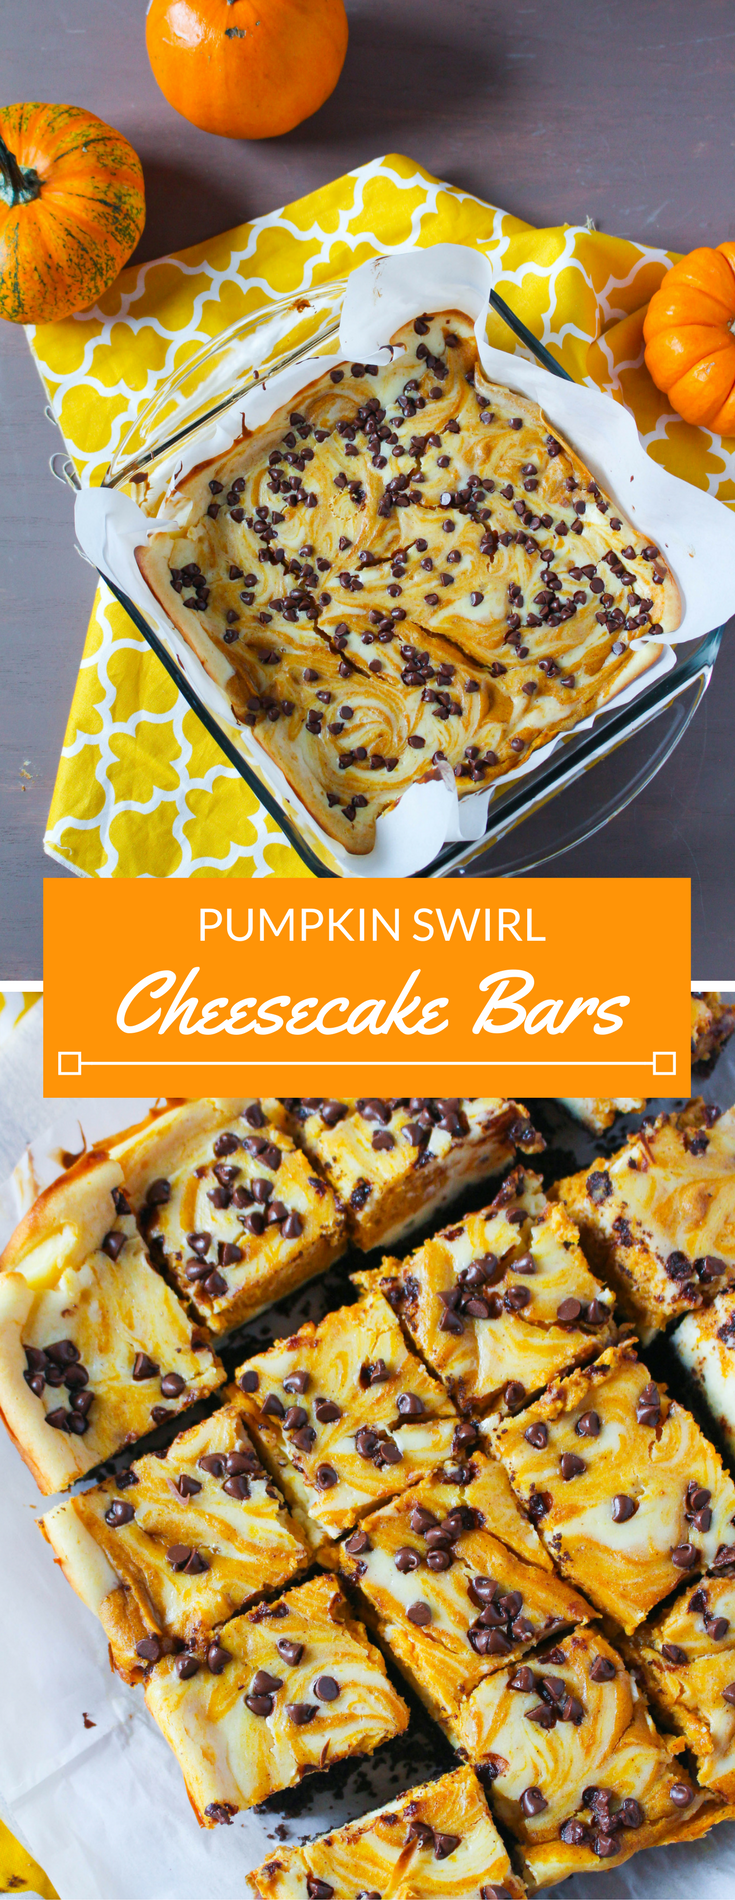 Pumpkin swirl cheesecake bars with mini chocolate chips and a chocolate graham cracker crust. Sure to please a crowd any time of year, not just during Halloween! 